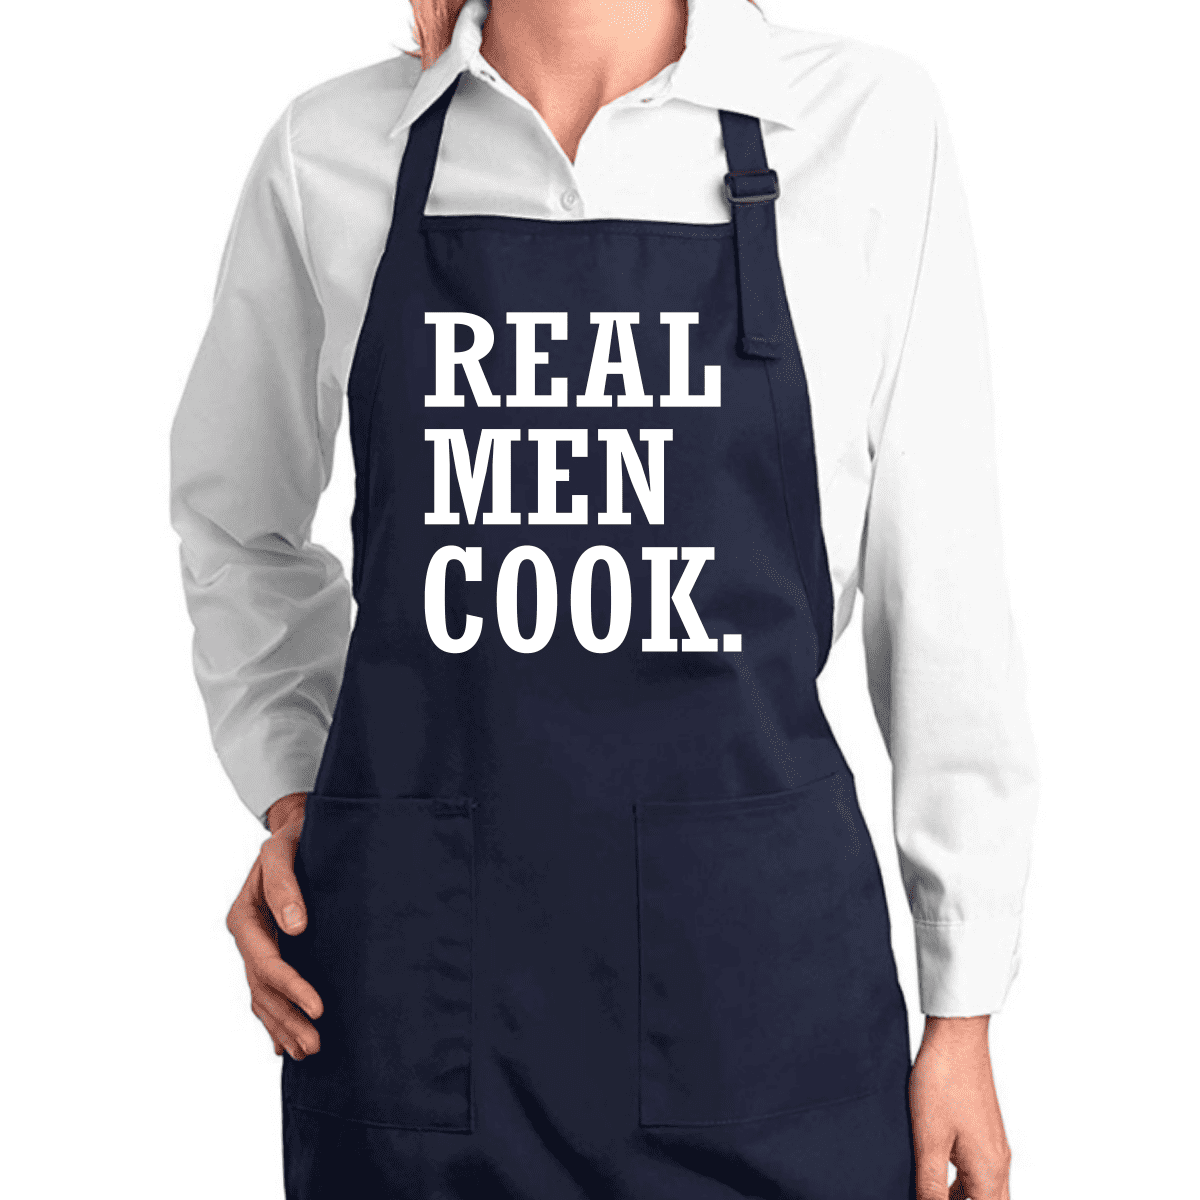 Funny Novelty Apron Kitchen Cooking My Perfect Day Motorbike 